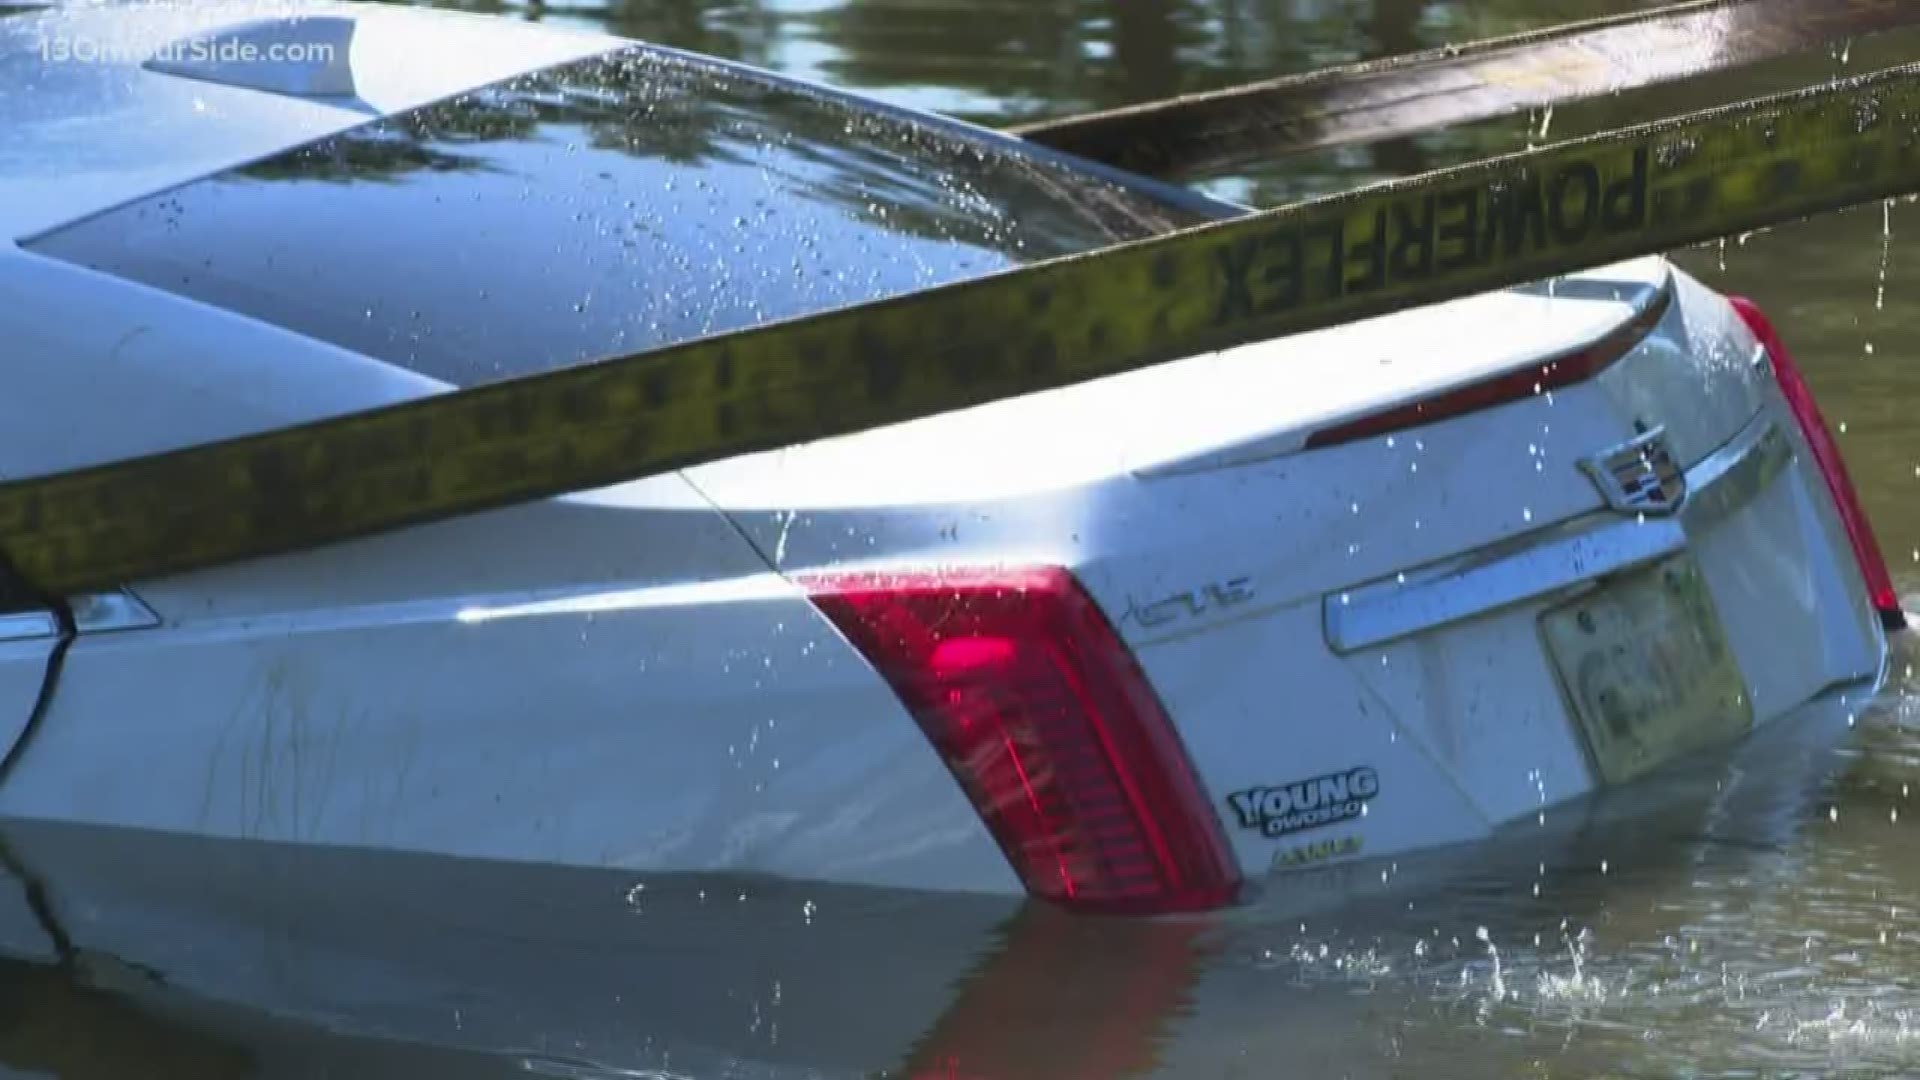 According to police, the driver had a medical emergency and drove his car into the water.